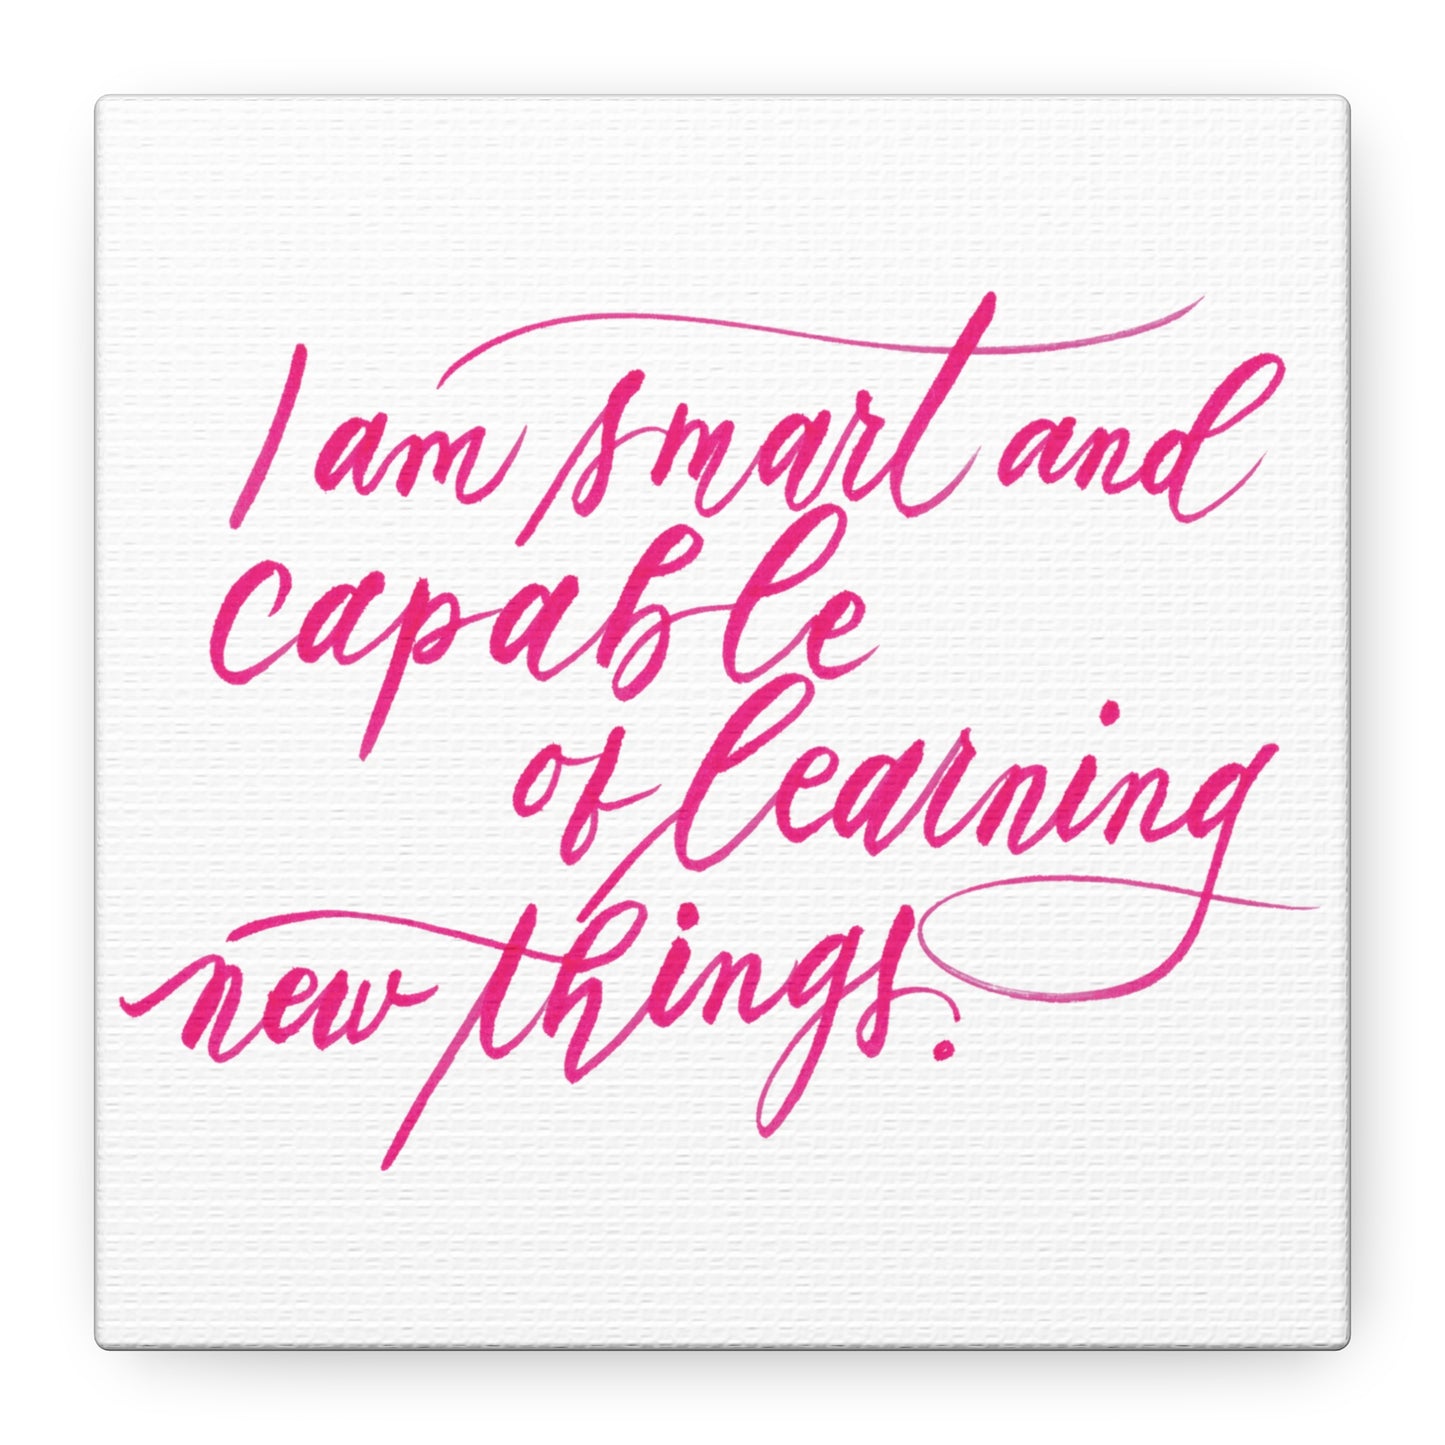 Mini 6"x6" Thick 1.25" Wall Decor Canvas - "I am smart..." Handwritten Calligraphy Printed onMatte Canvas, Stretched, 1.25" - I am Empowered #04